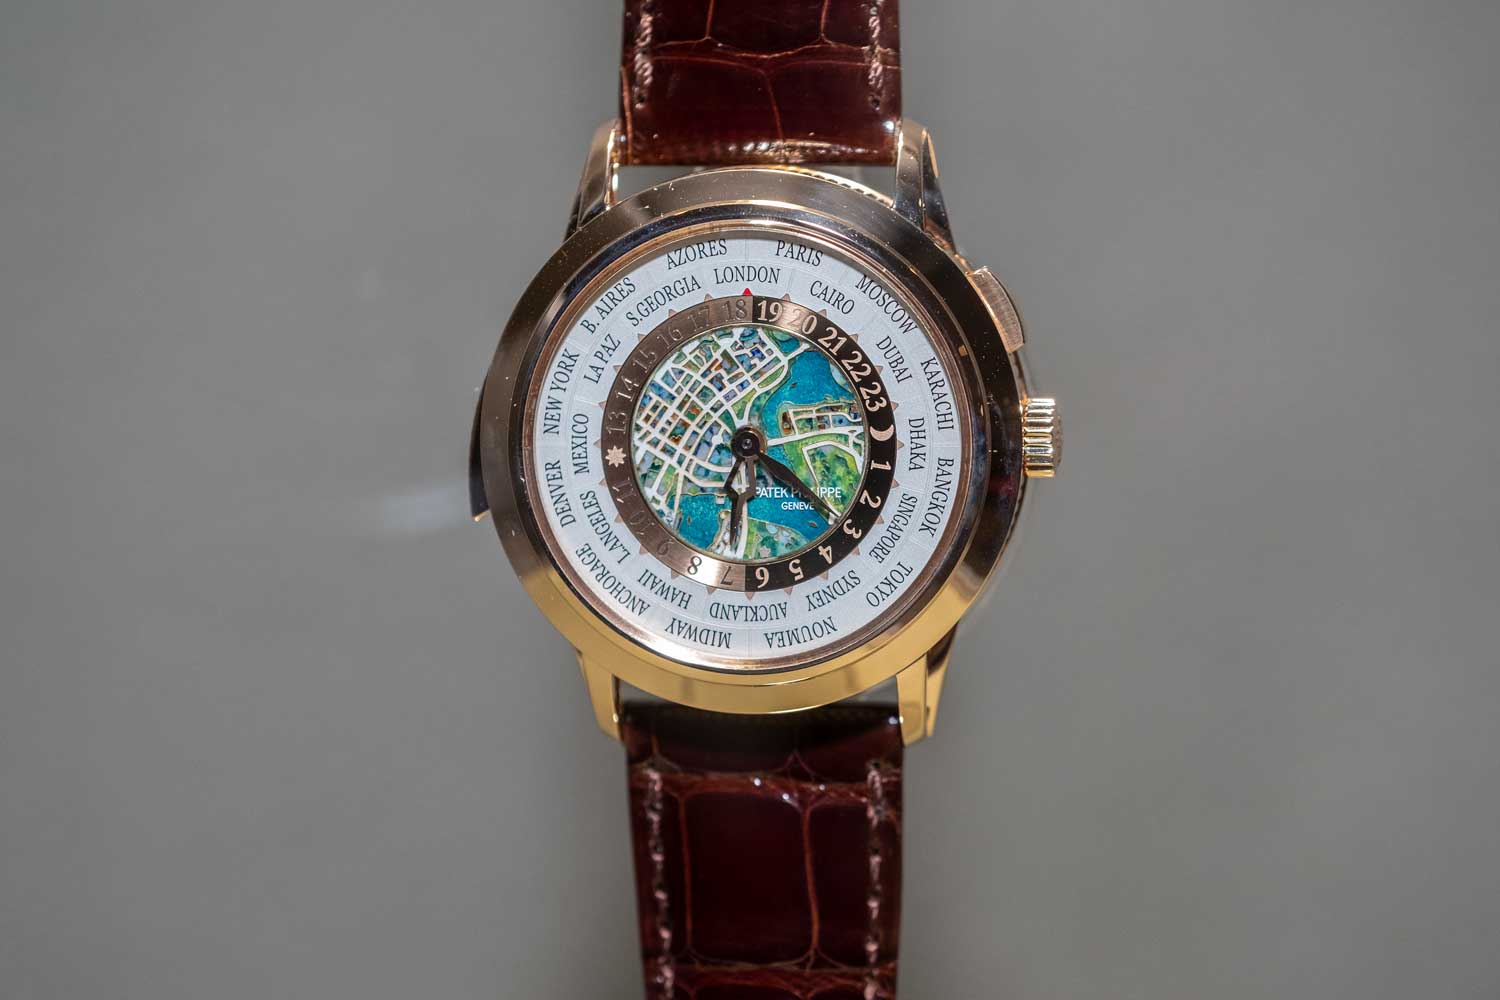 Ref. 5531 – World Time Minute Repeater Singapore 2019 Special Edition. An exclusive version with a map of Singapore in cloisonné enamel. Limited to 5 pieces.